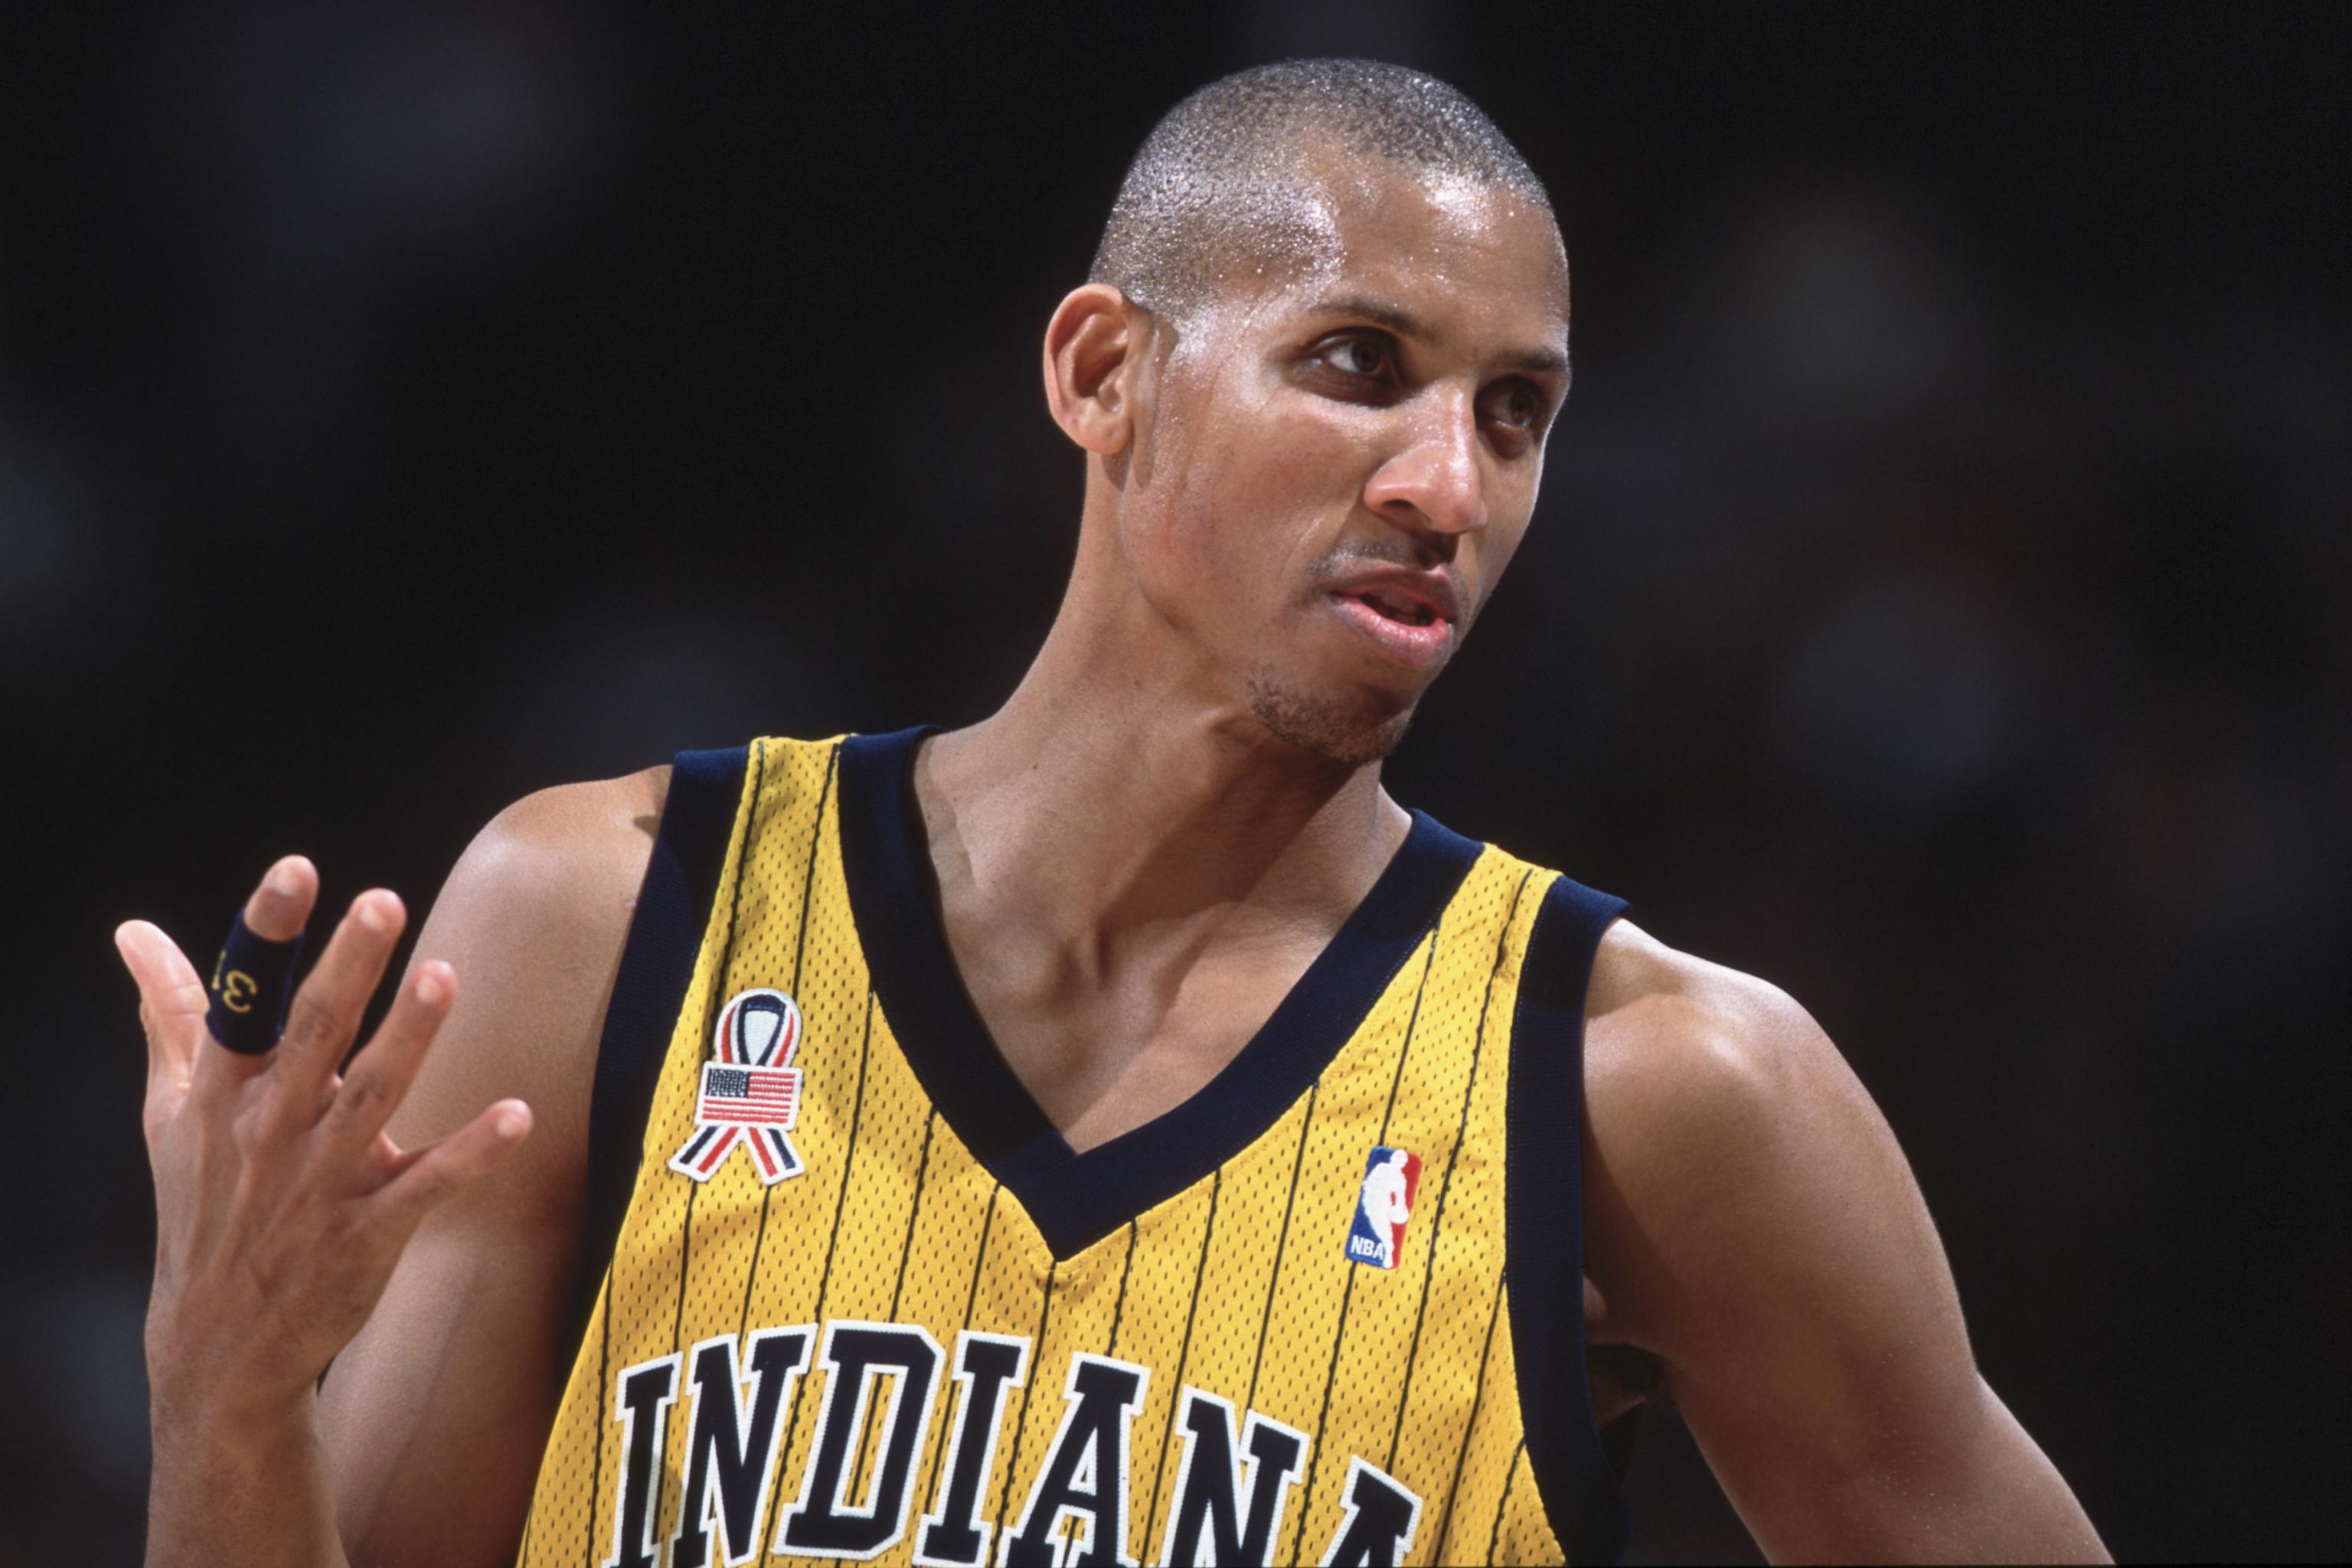 pacers old jerseys